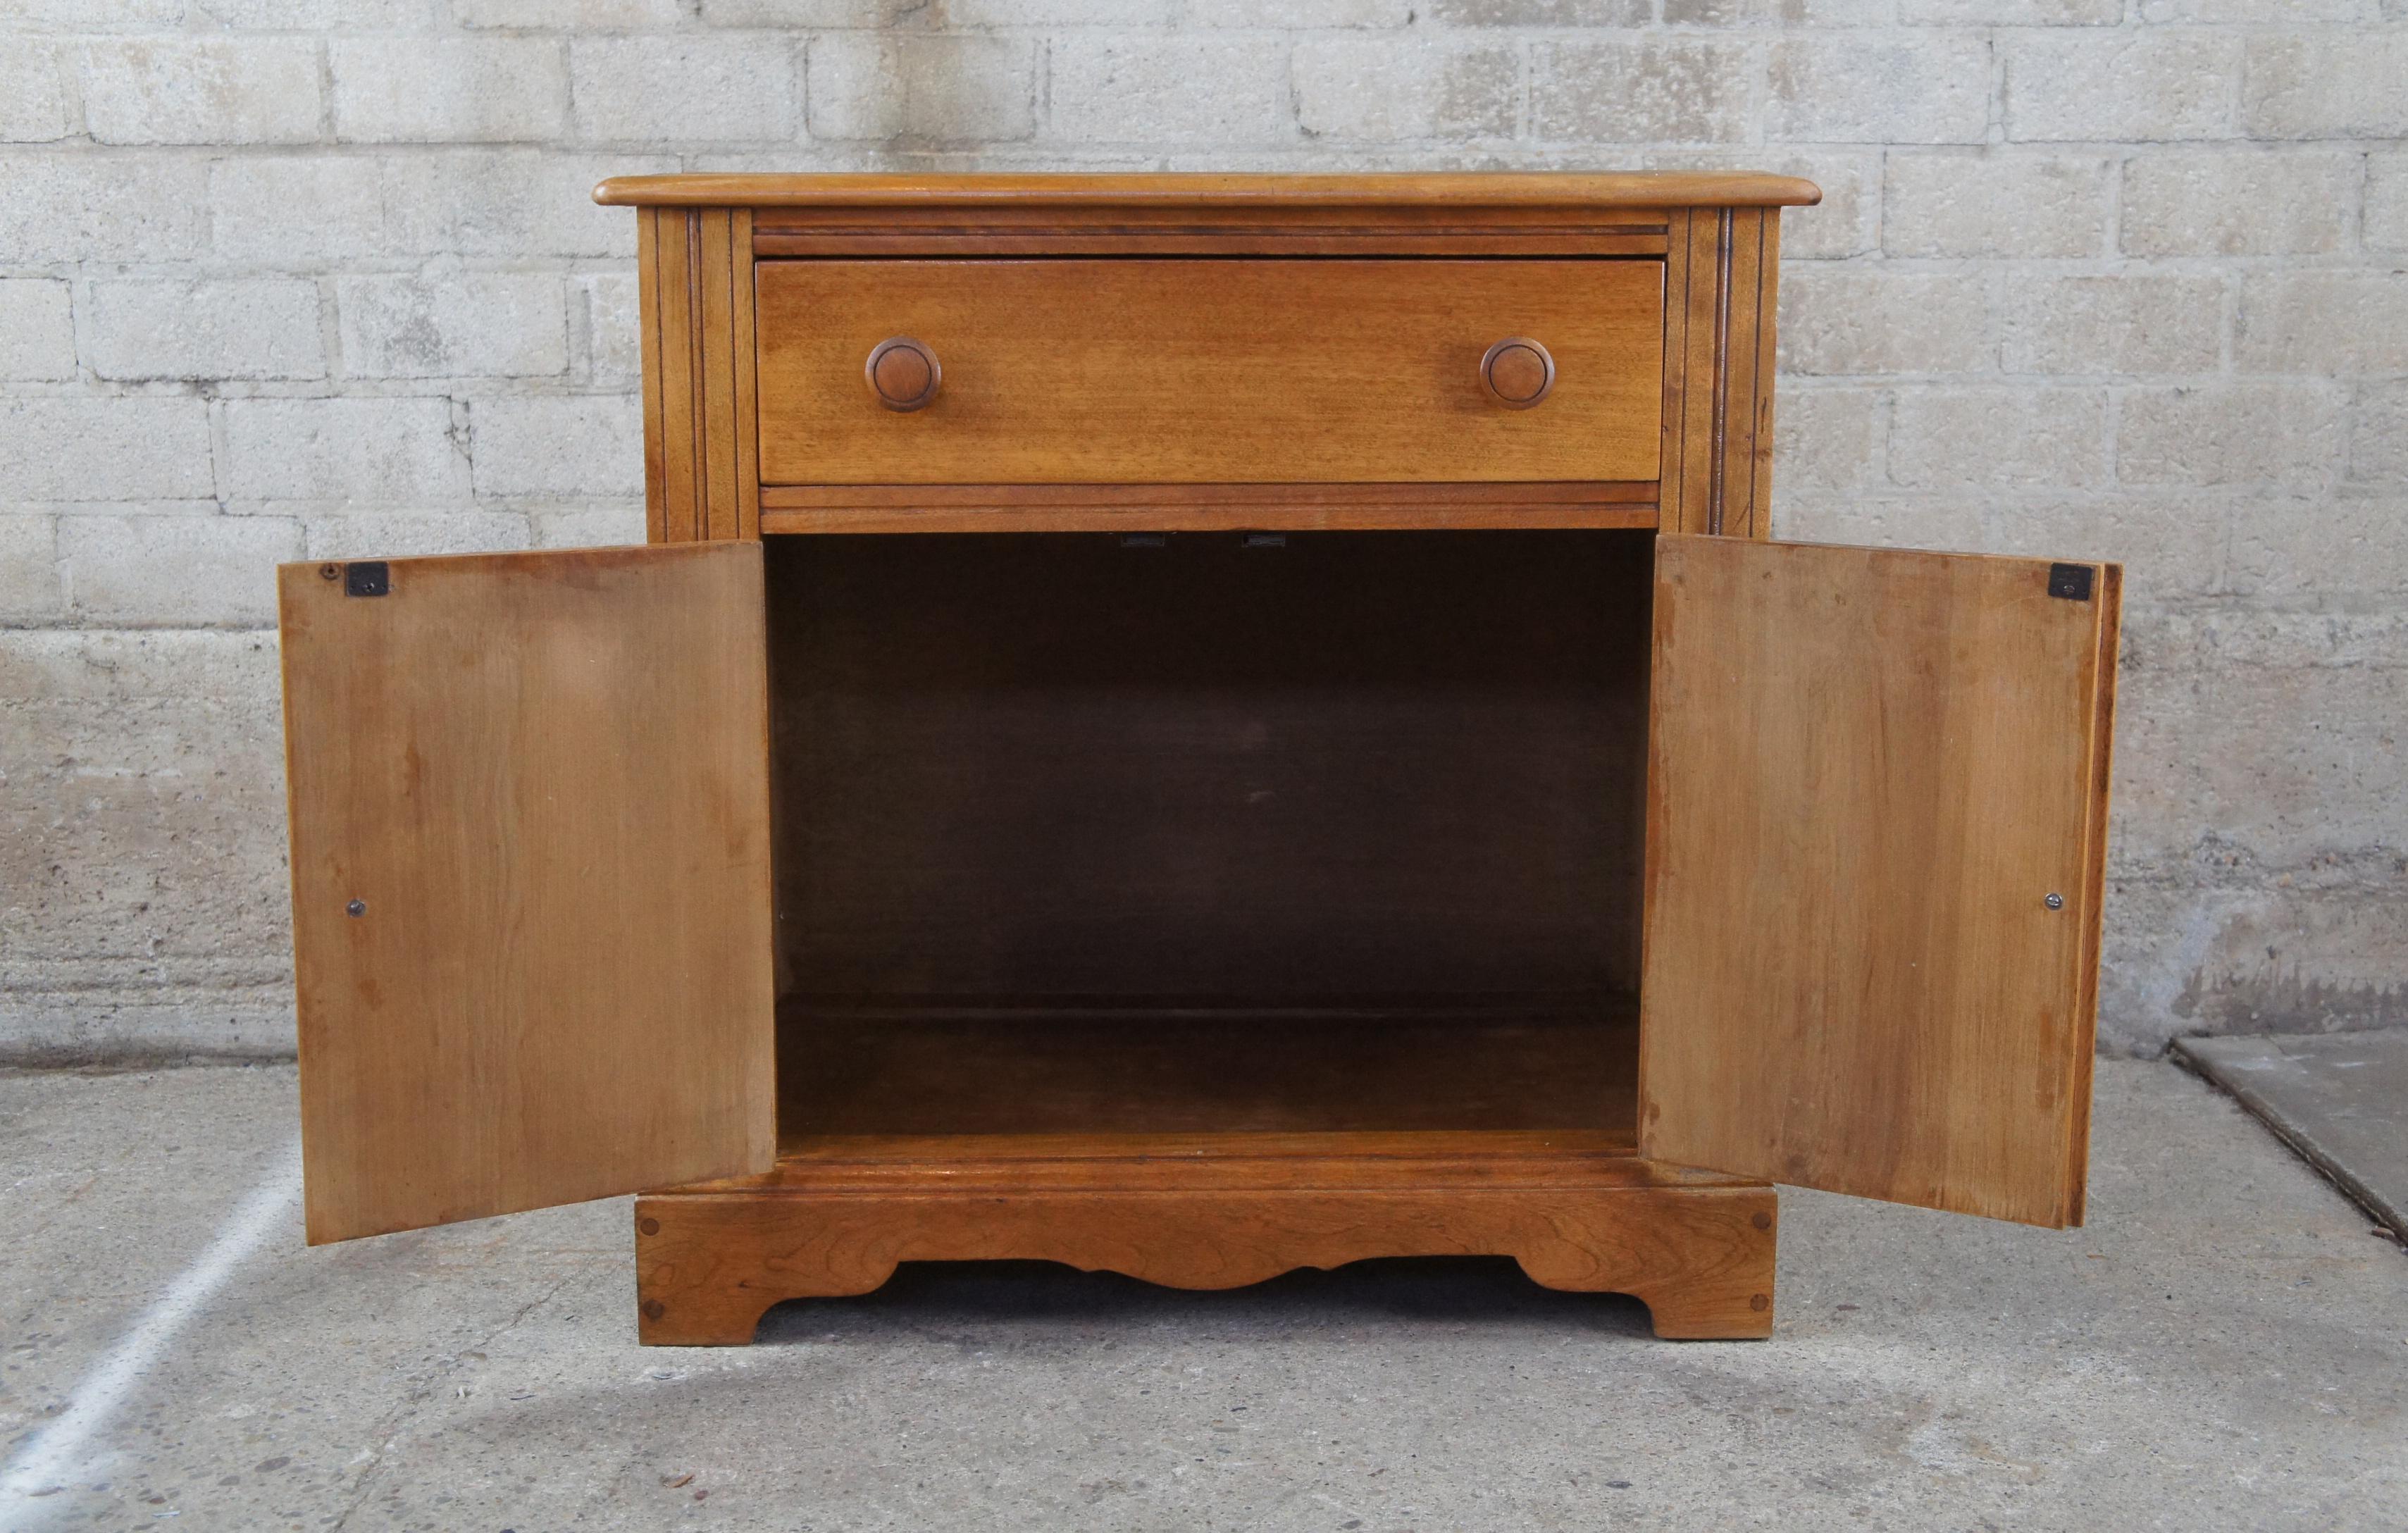 20th Century Vintage Early American Style Country Pine Farmhouse Cabinet Sideboard Console